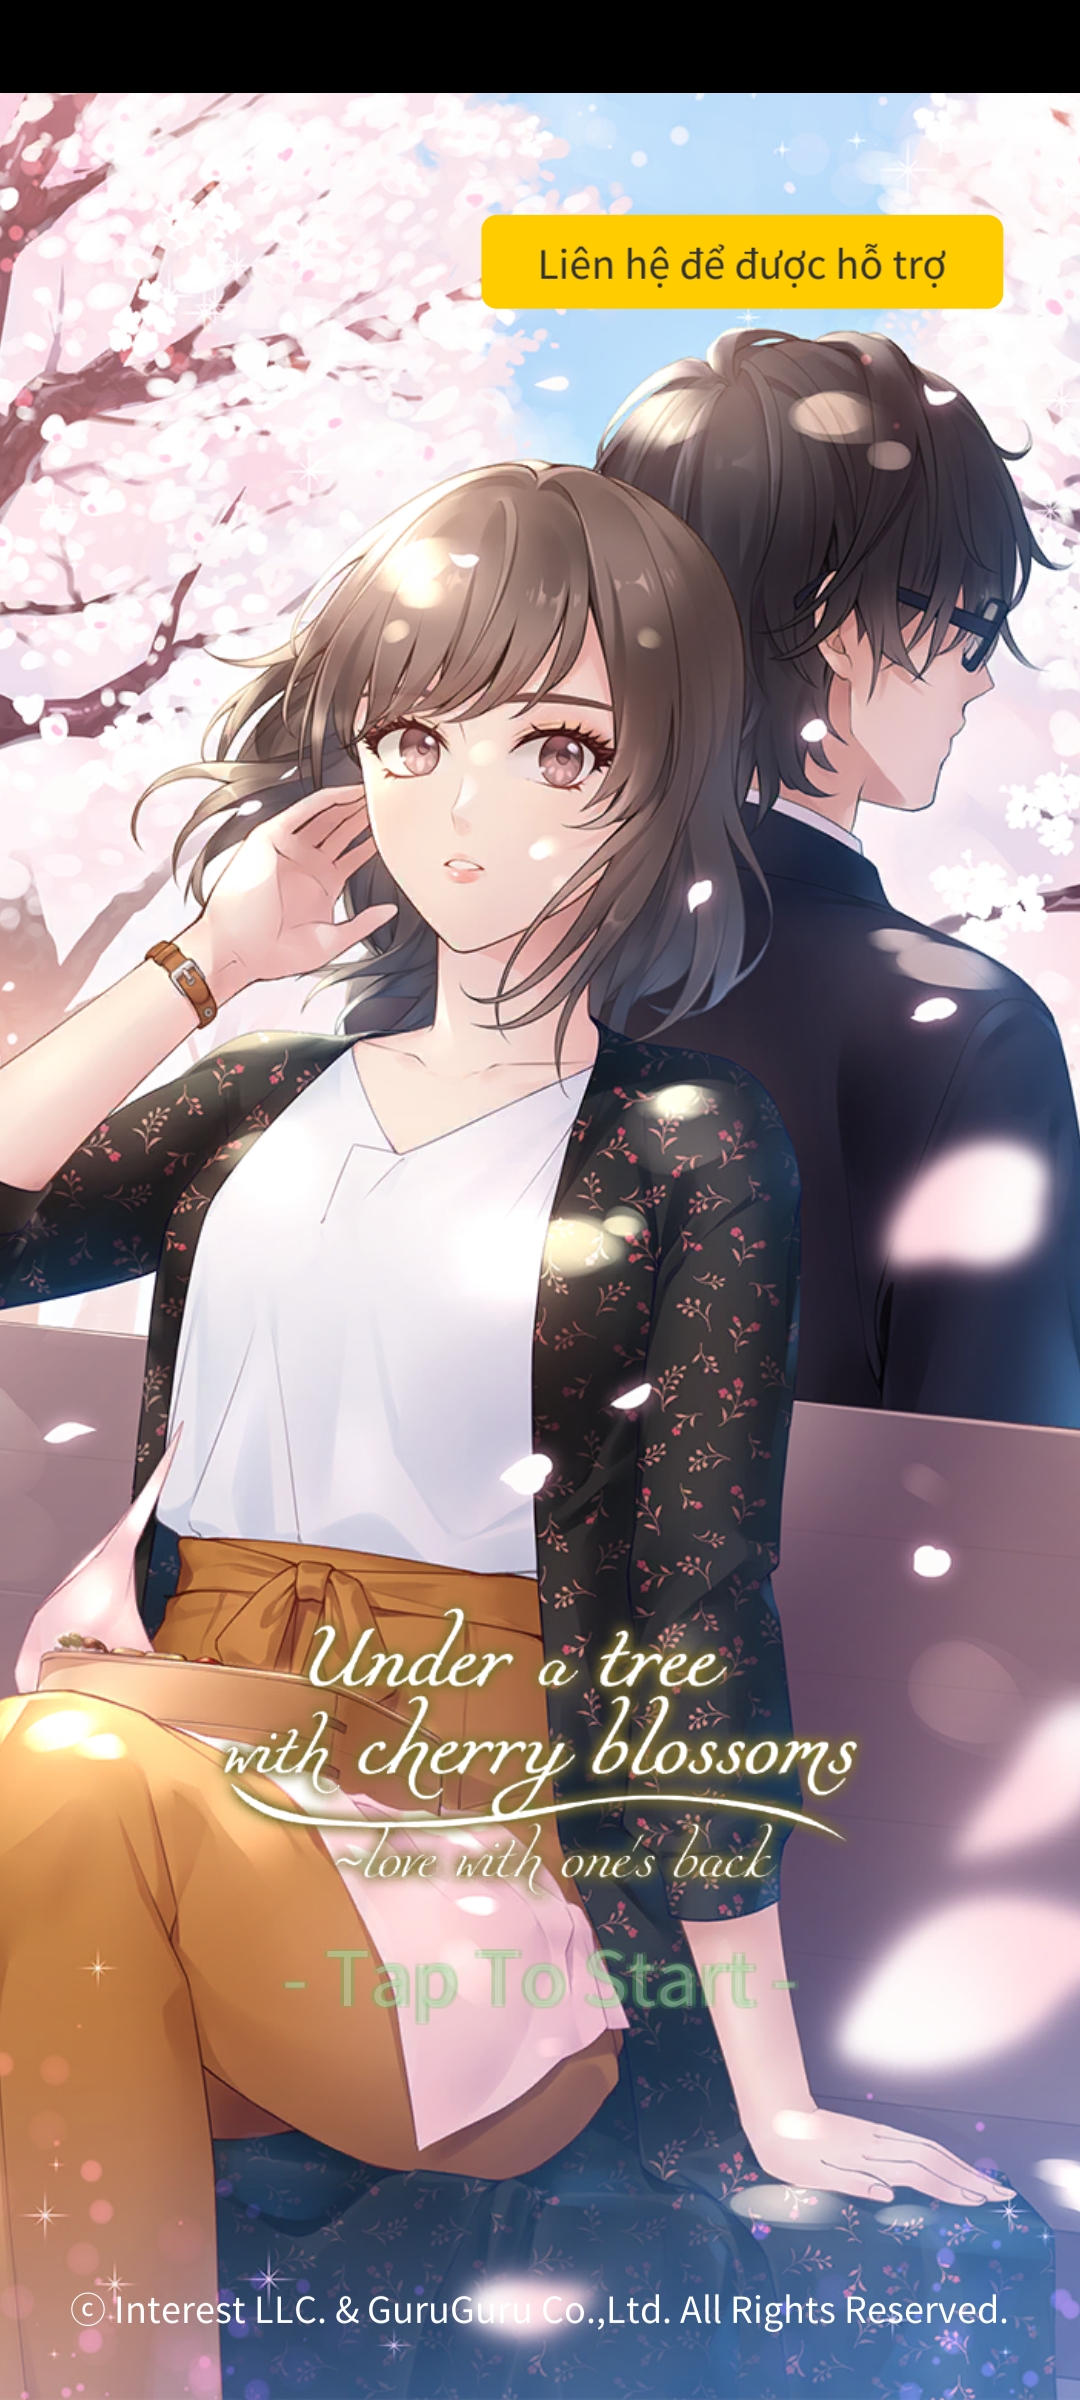 [Game Android] Under the tree Otome Game Tiếng Việt